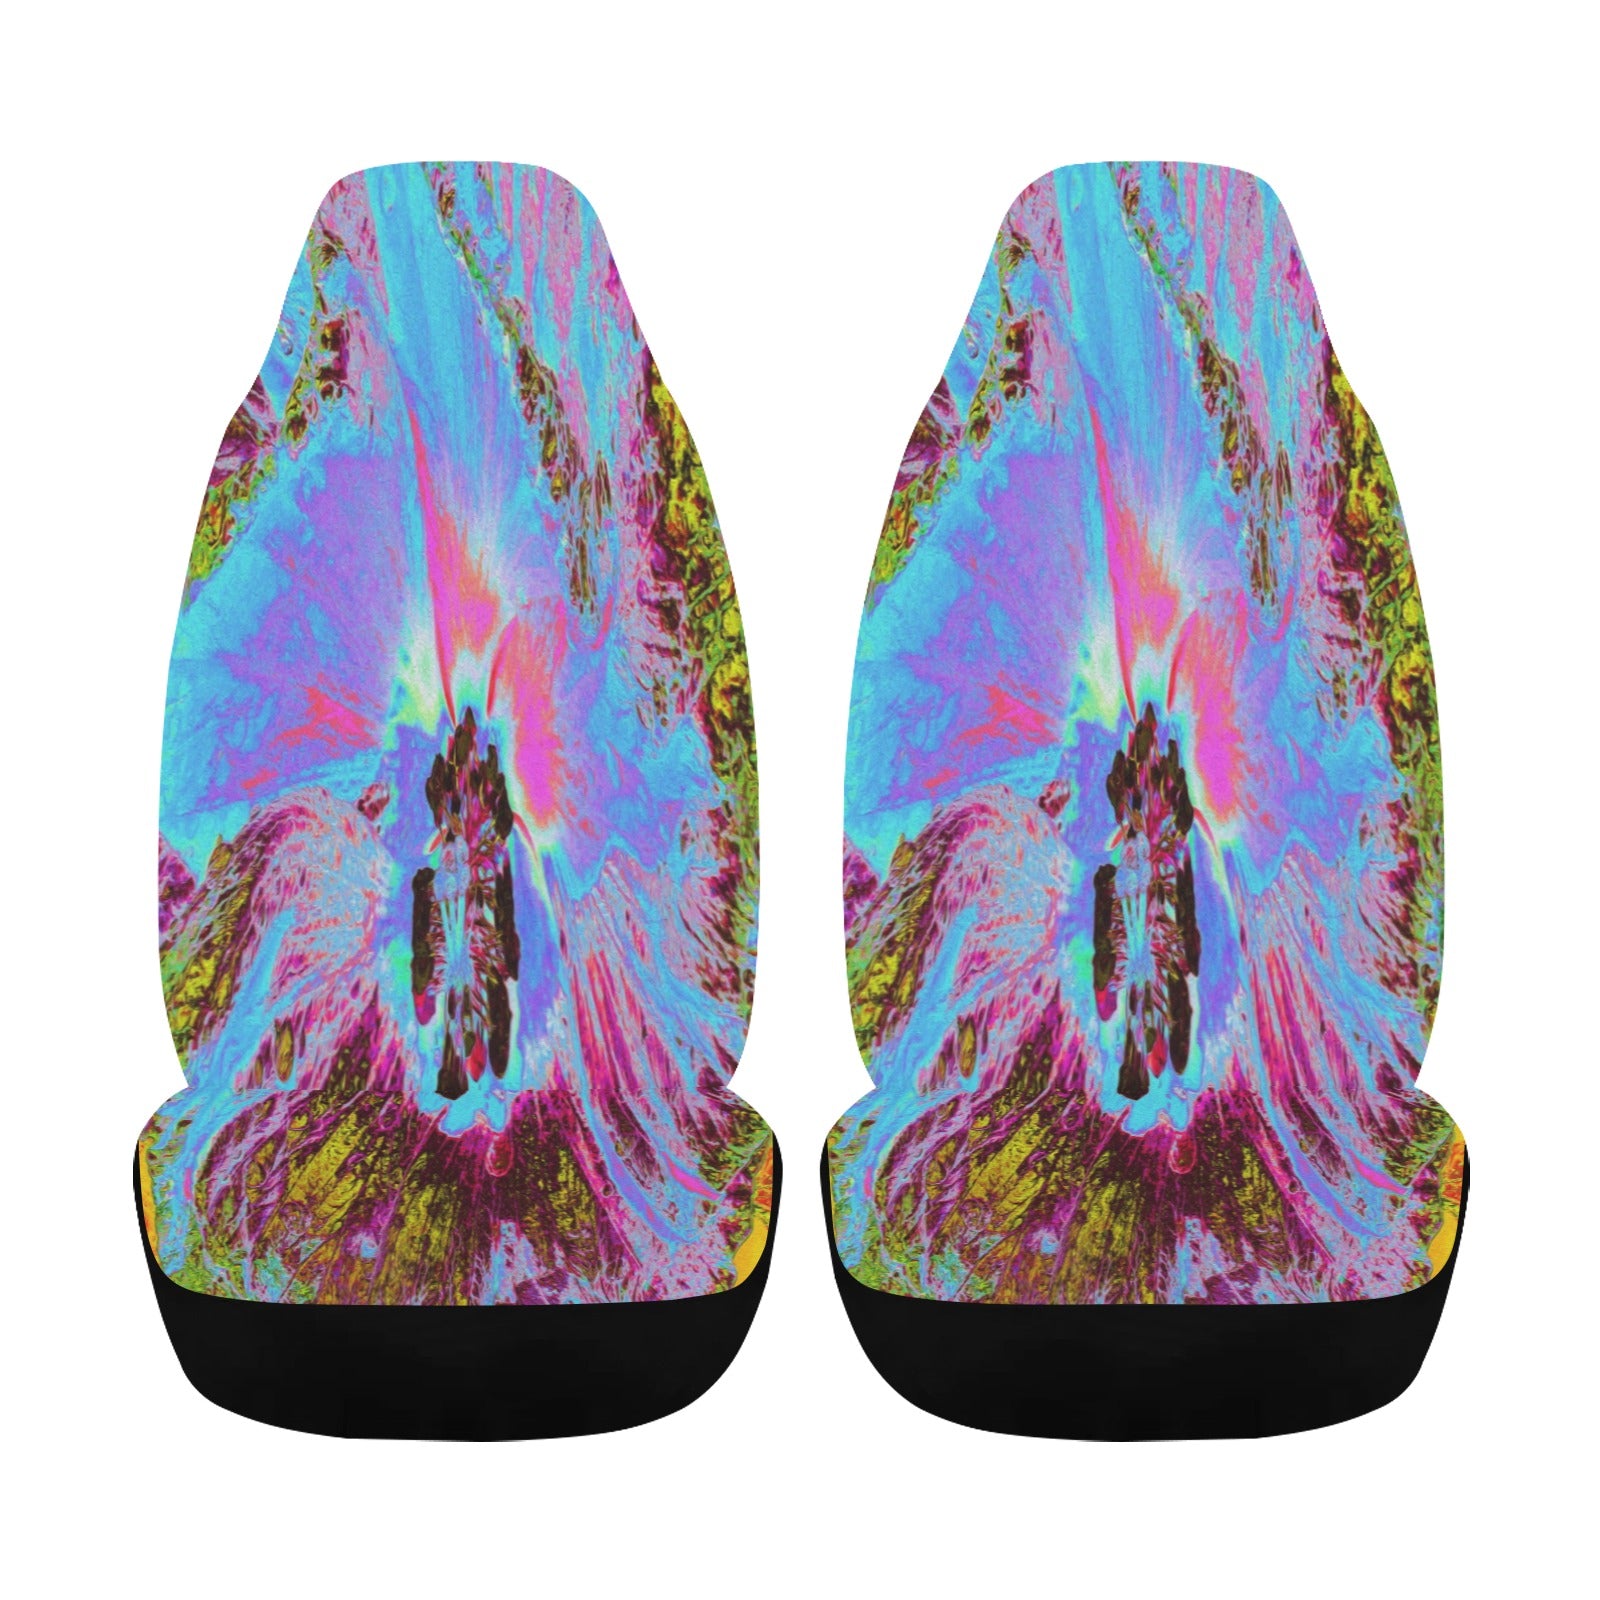 Car Seat Covers, Psychedelic Cornflower Blue and Magenta Hibiscus